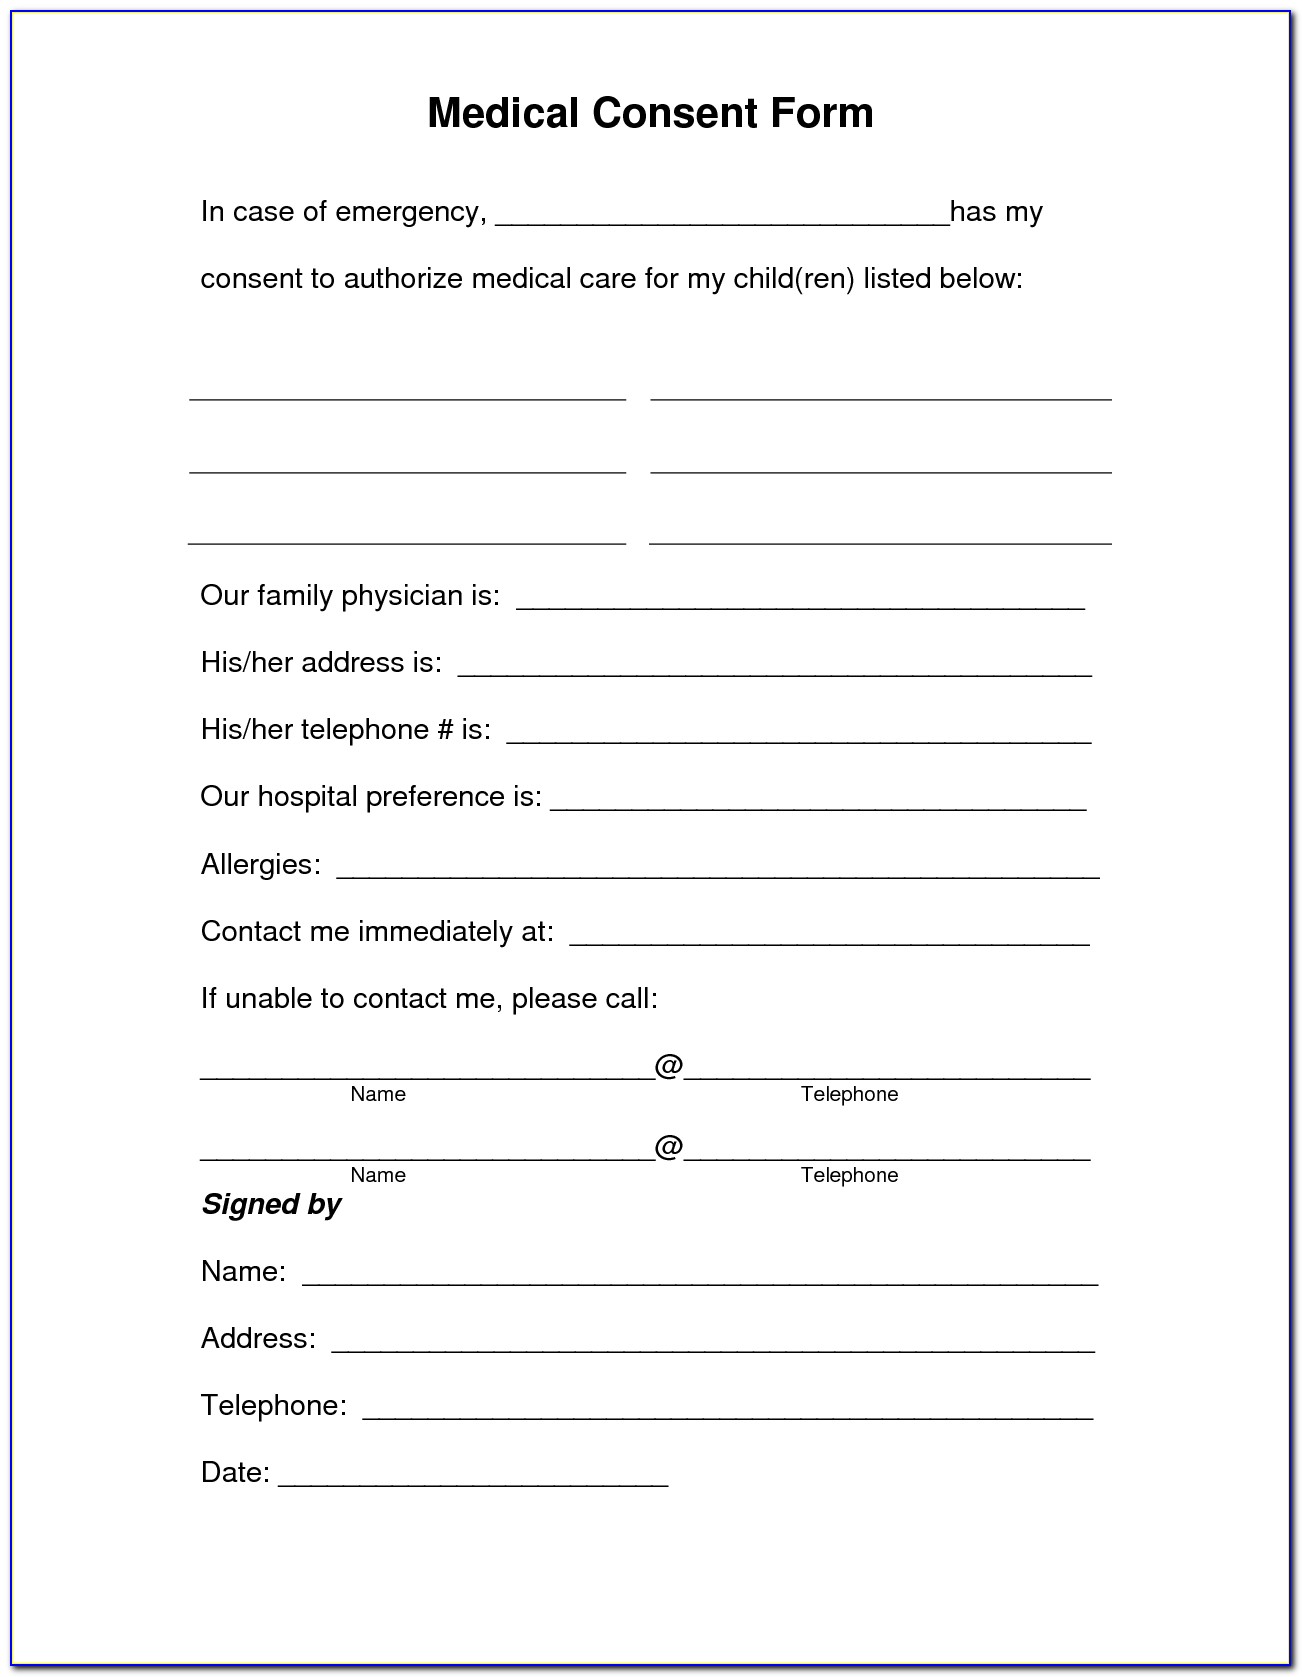 United Health Care Consent Form